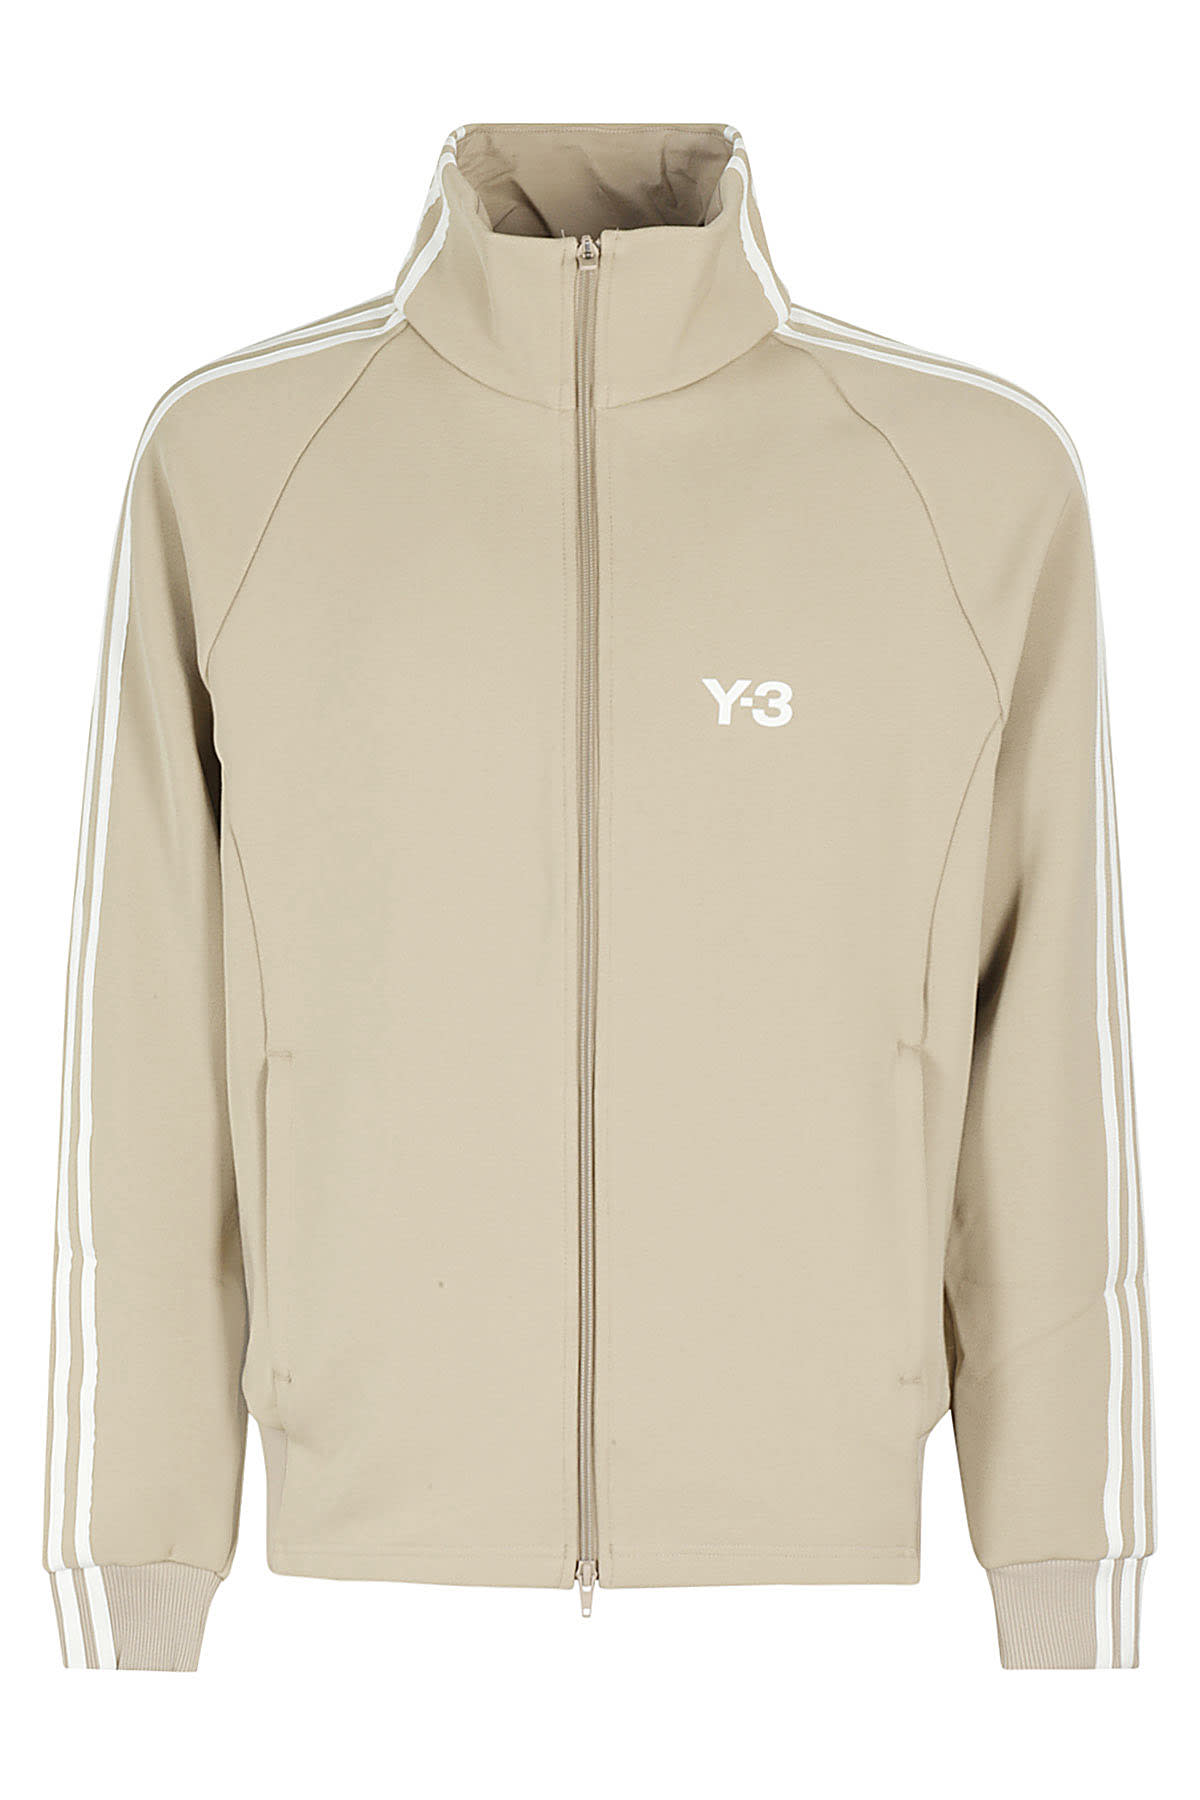 Y-3 3s Track Top In Trakha Owhite